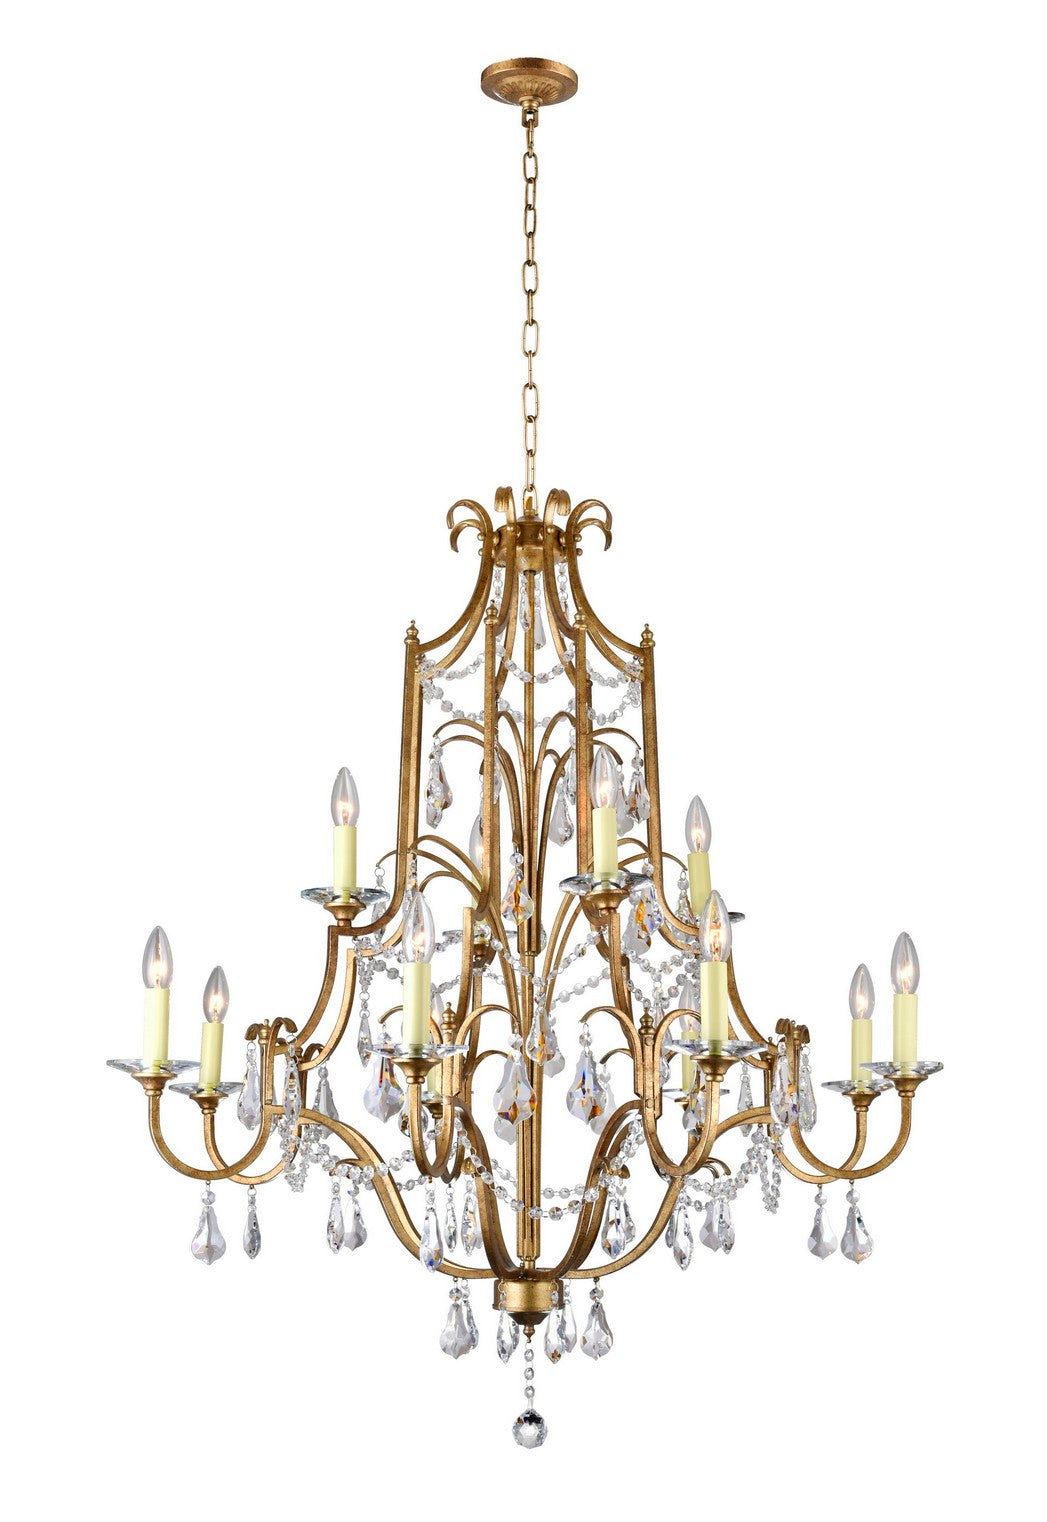 12 LIGHT UP CHANDELIER WITH OXIDIZED BRONZE FINISH - Dreamart Gallery